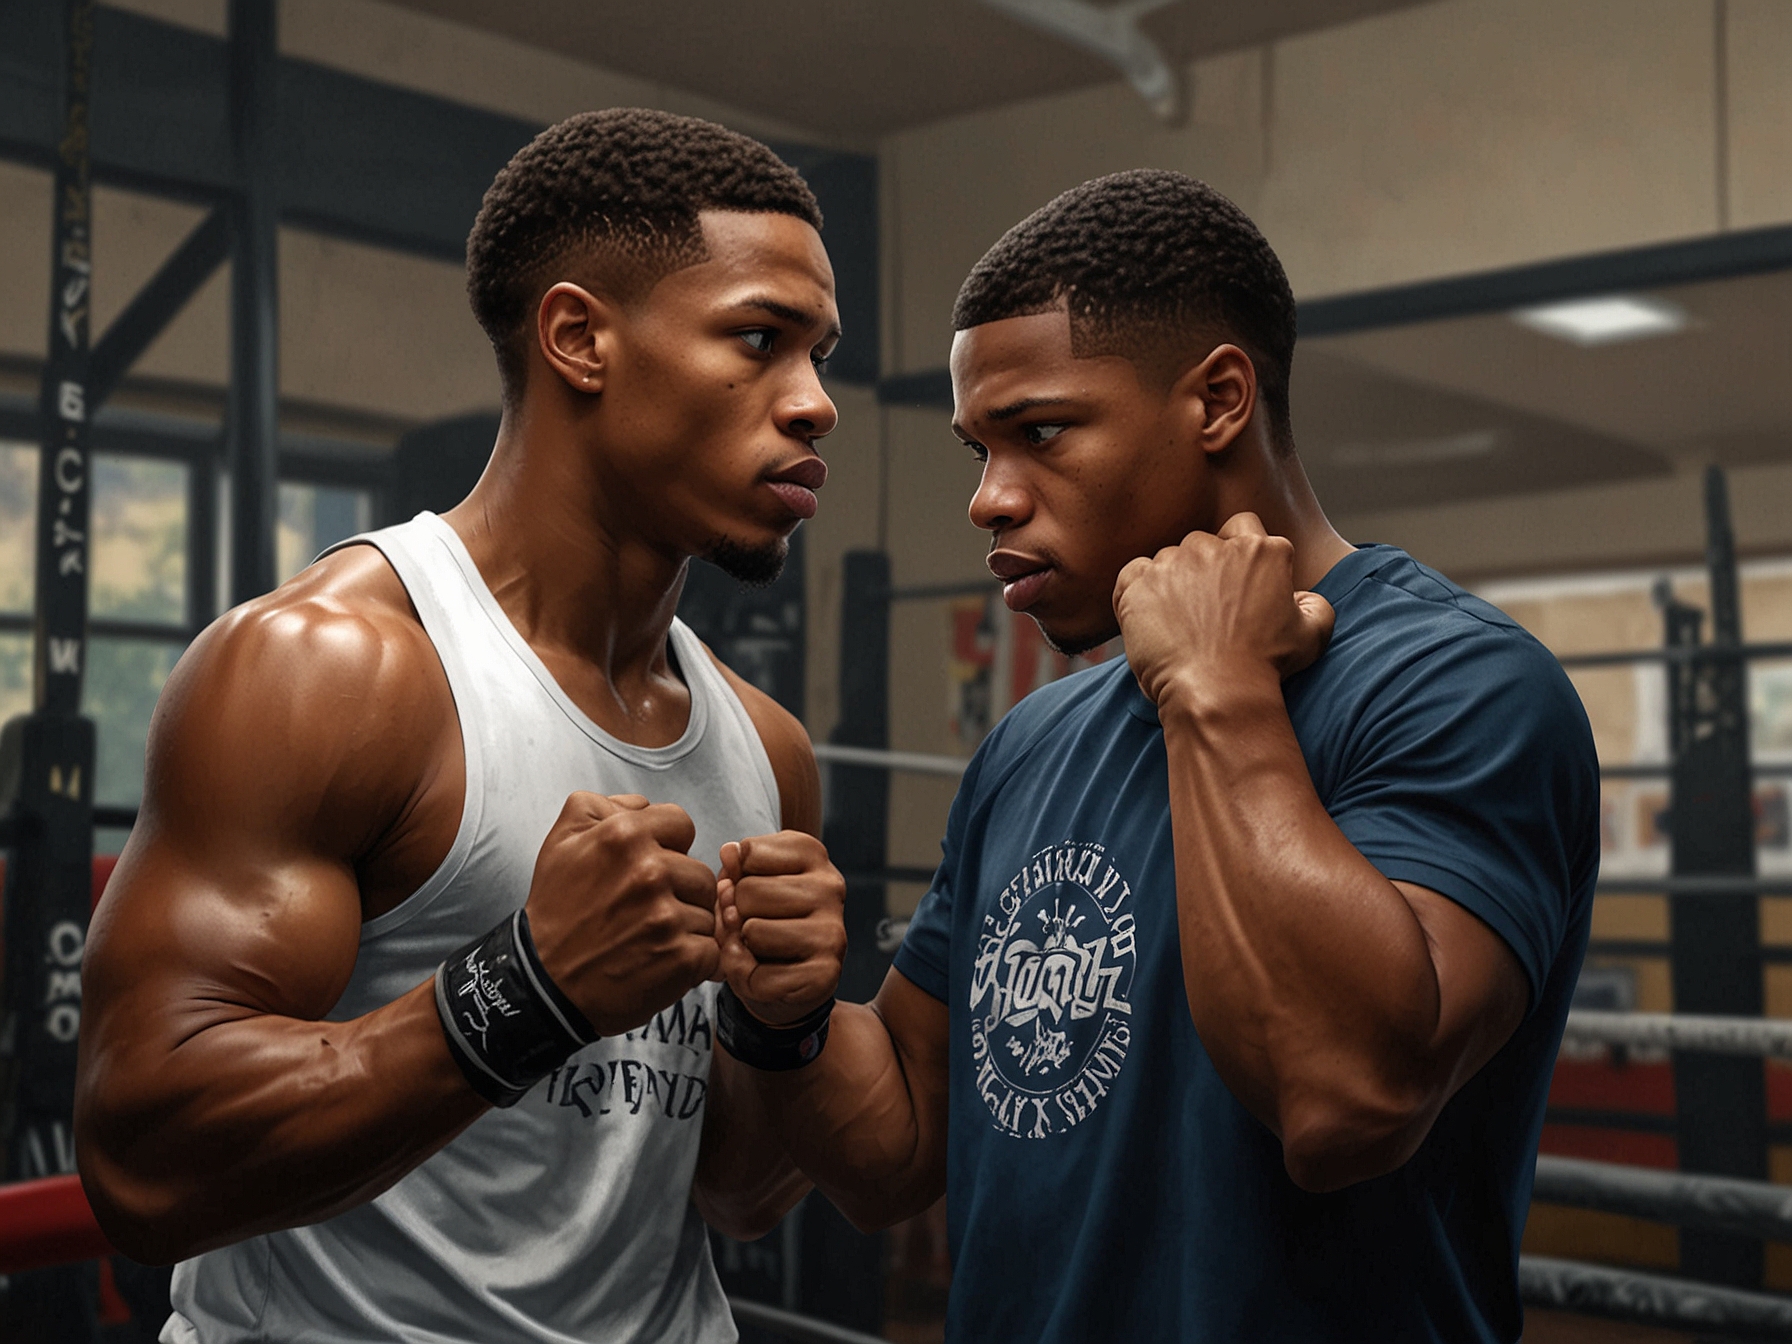 Father and trainer Bill Haney with his son, WBC Junior Welterweight champion Devin Haney, in the gym, showcasing their strong bond and professional synergy during a training session.